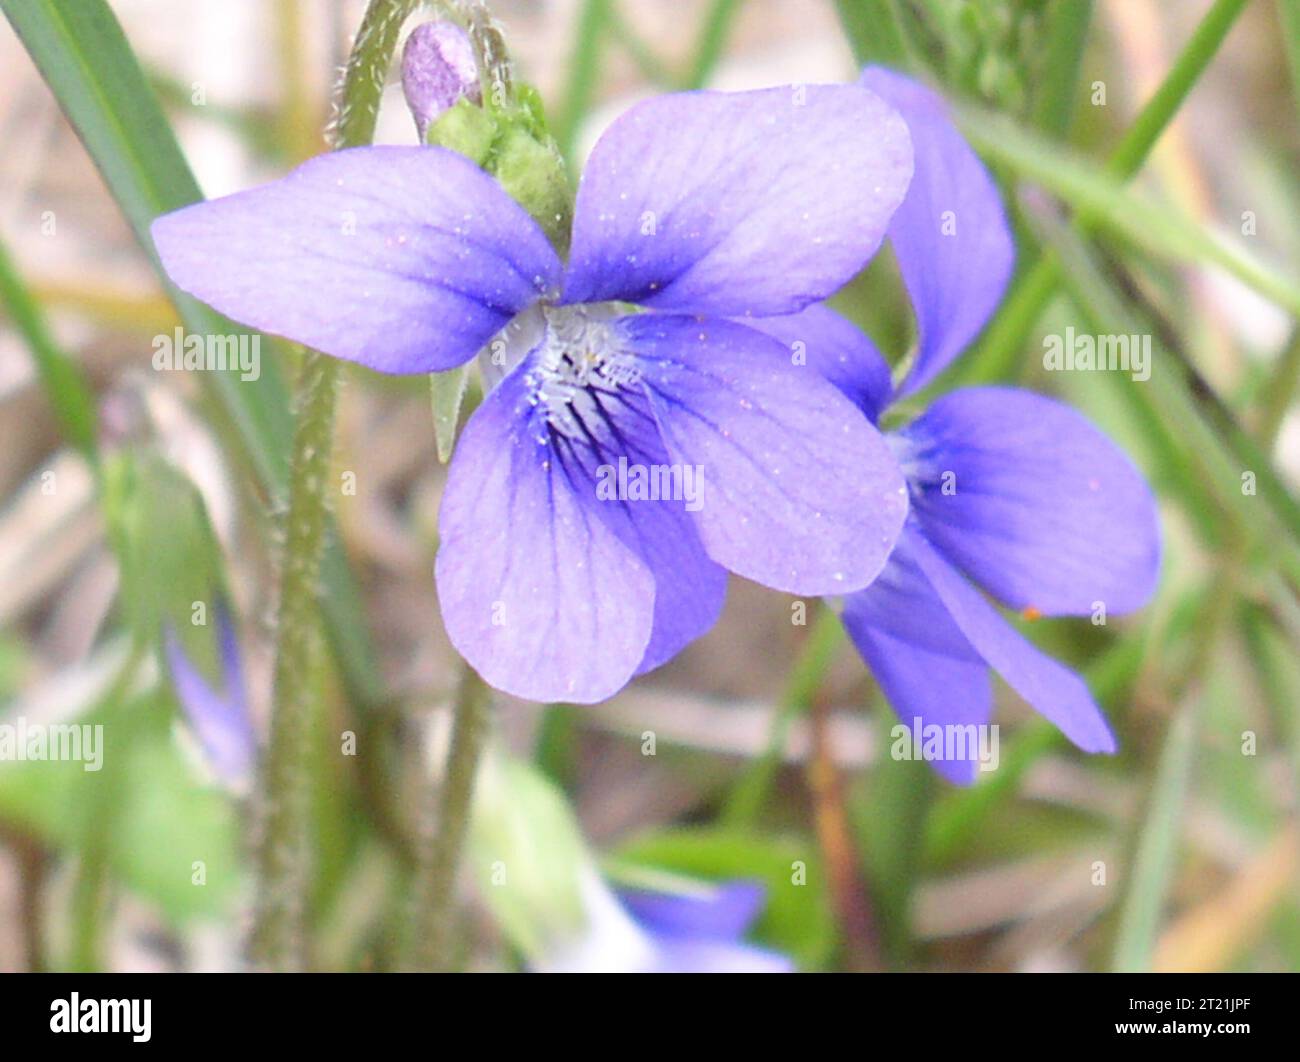 Flowering plant;Westerly Rhode Island Town Forests; Close-up view of a blue violet Taken May 11, 2003 by Mark A. Engler. Subjects: Plants; Flowering plants. Location: Rhode Island. Stock Photo